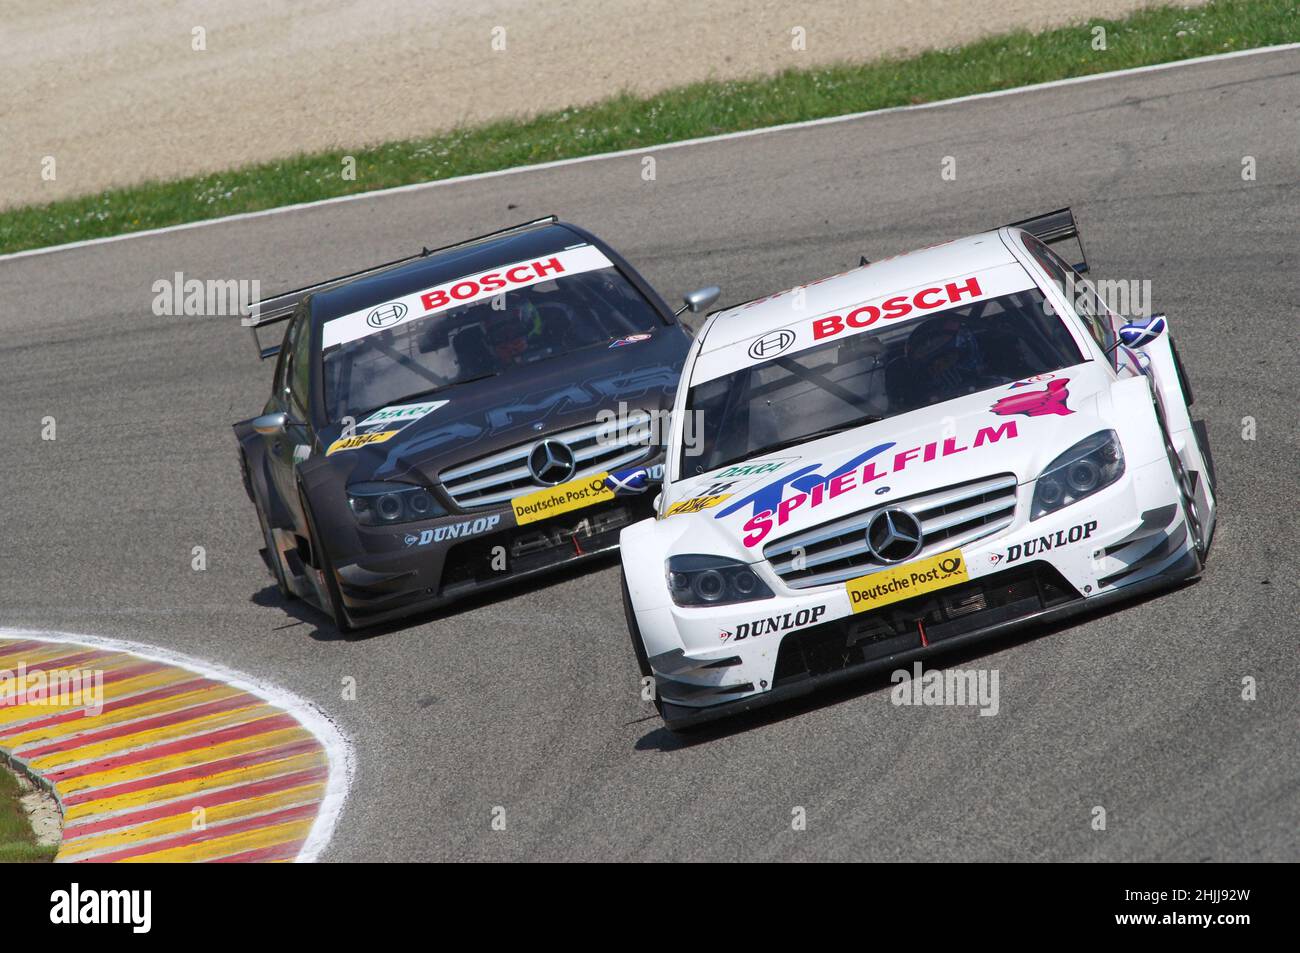 Mugello Circuit, Italy 2 May 2008: Susie Stoddart in action with AMG Mercedes C-Klasse 2007 of Persson Motorsport Team during Race of DTM at Mugello C Stock Photo